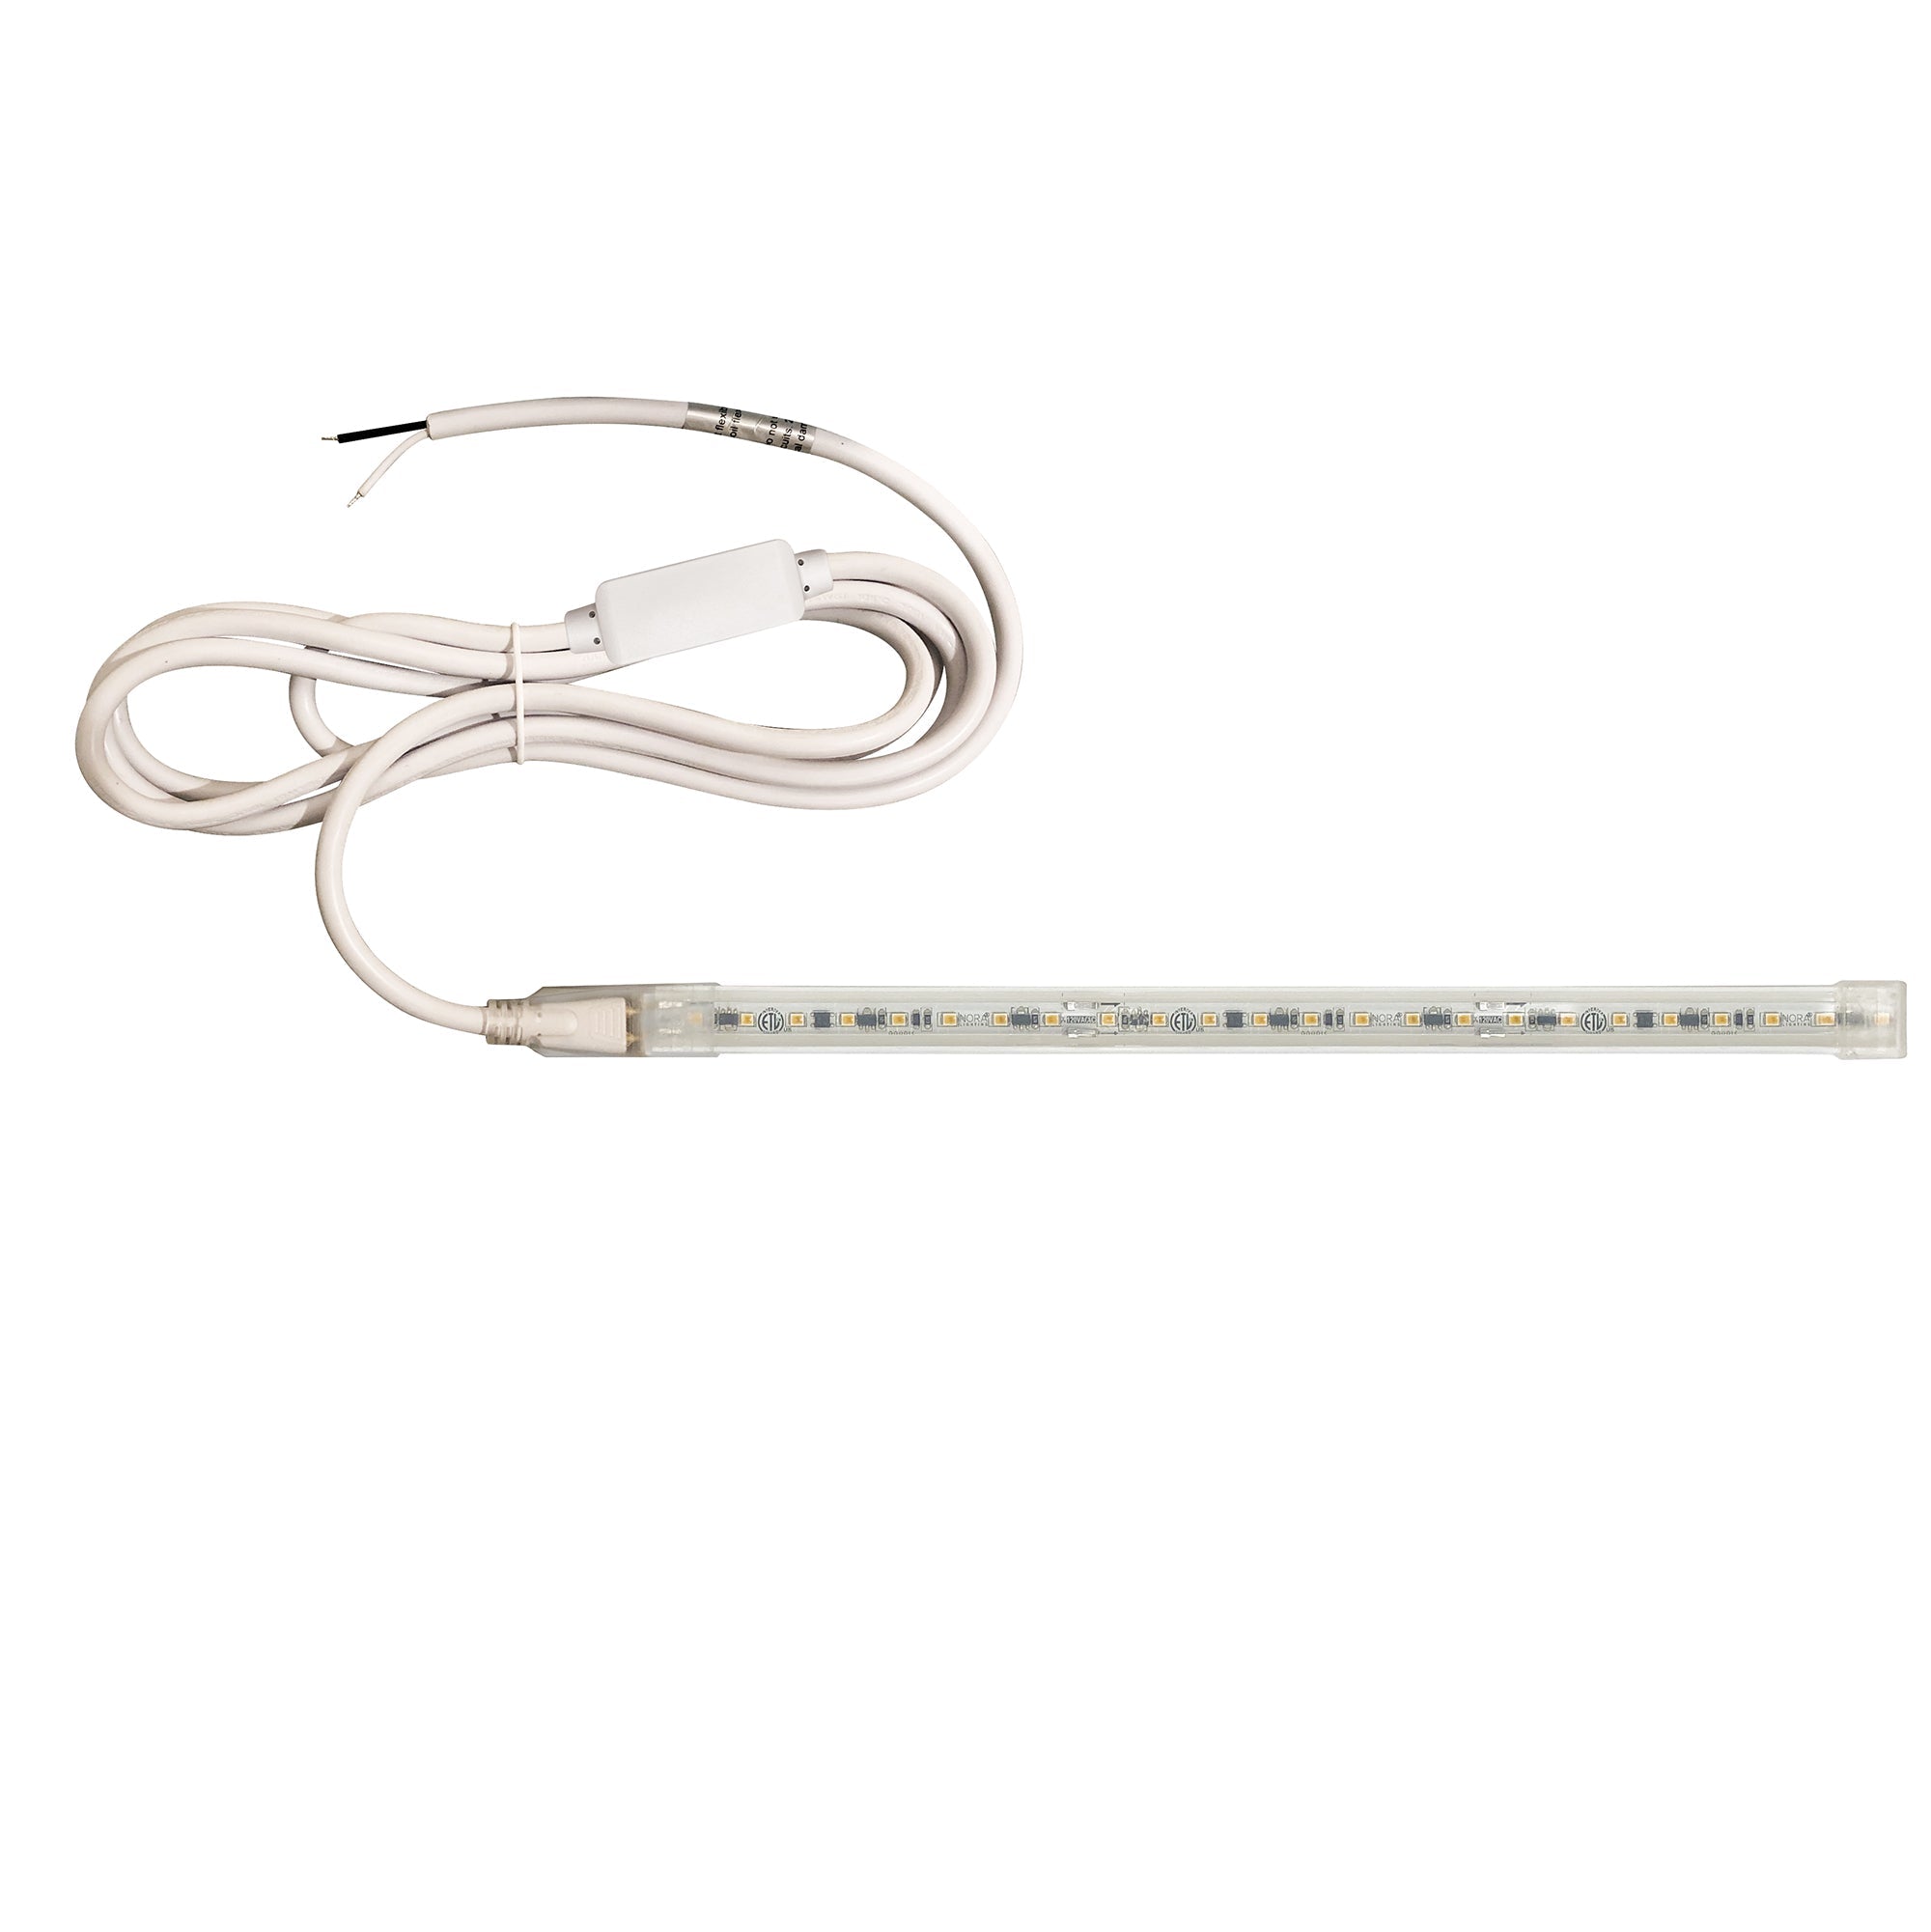 Nora Lighting NUTP13-W5-4-12-930/HWSP - Accent / Undercabinet - Custom Cut 5-ft, 4-in 120V Continuous LED Tape Light, 330lm / 3.6W per foot, 3000K, w/ Mounting Clips and 8' Hardwired Power Cord w/ Surge Protector